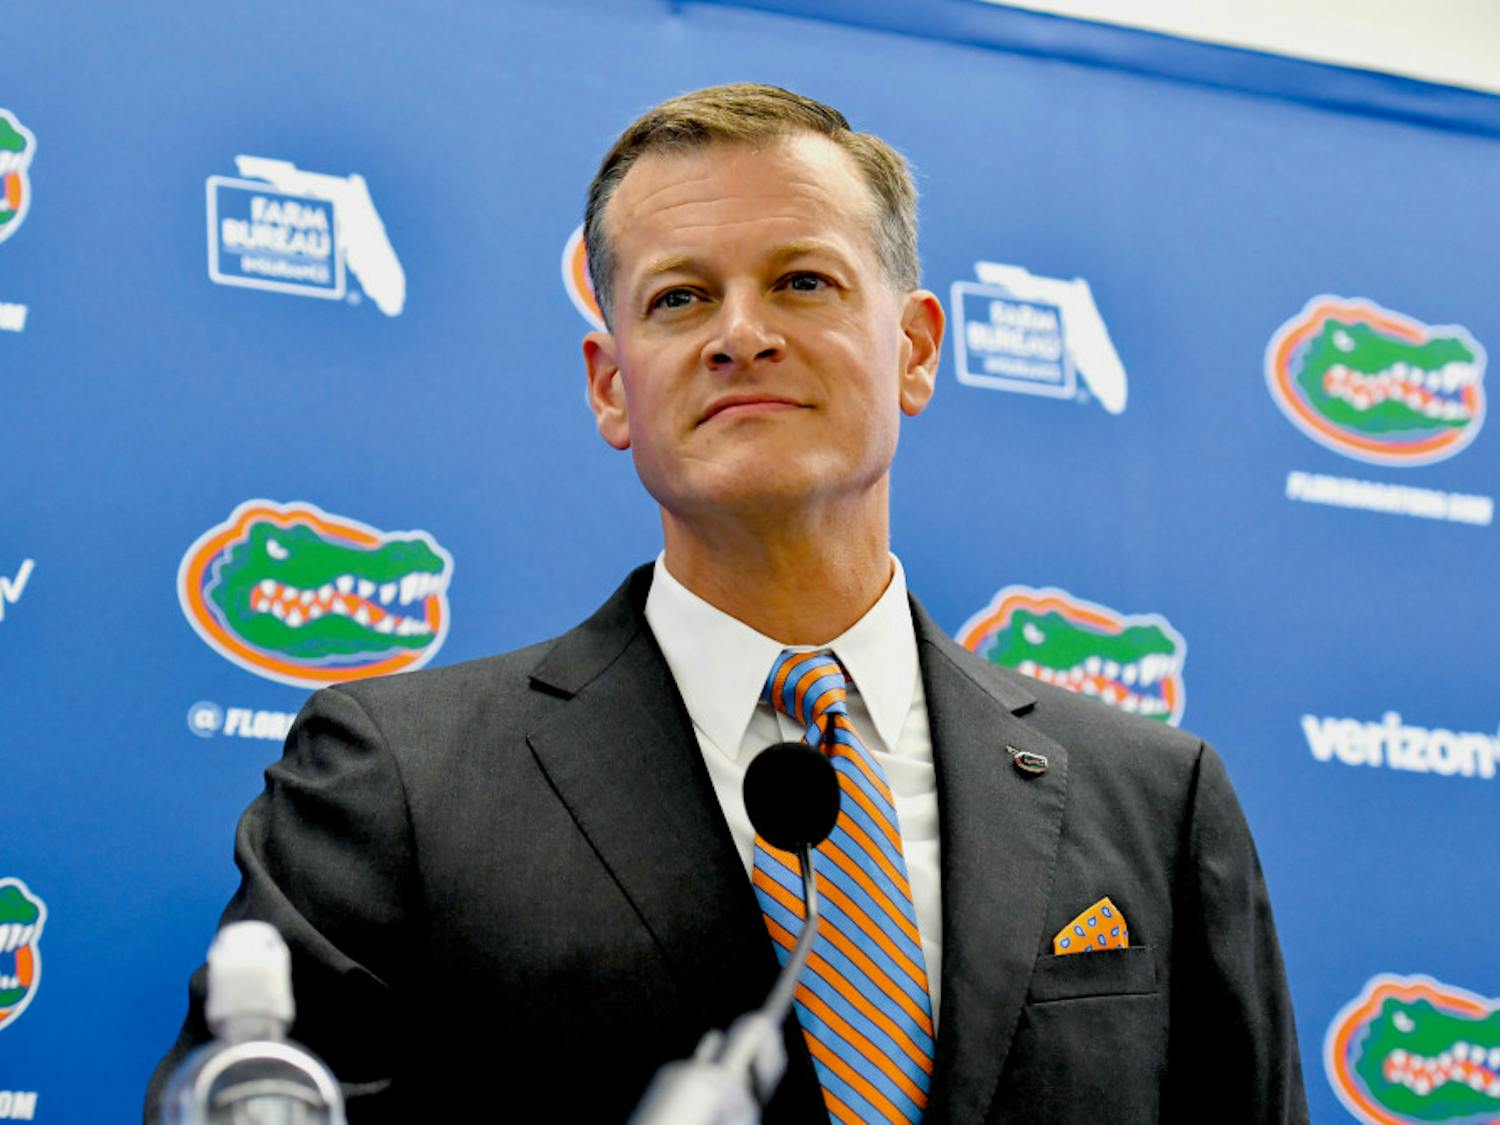 Scott Stricklin addressed the future of spring sports at UF Friday afternoon.